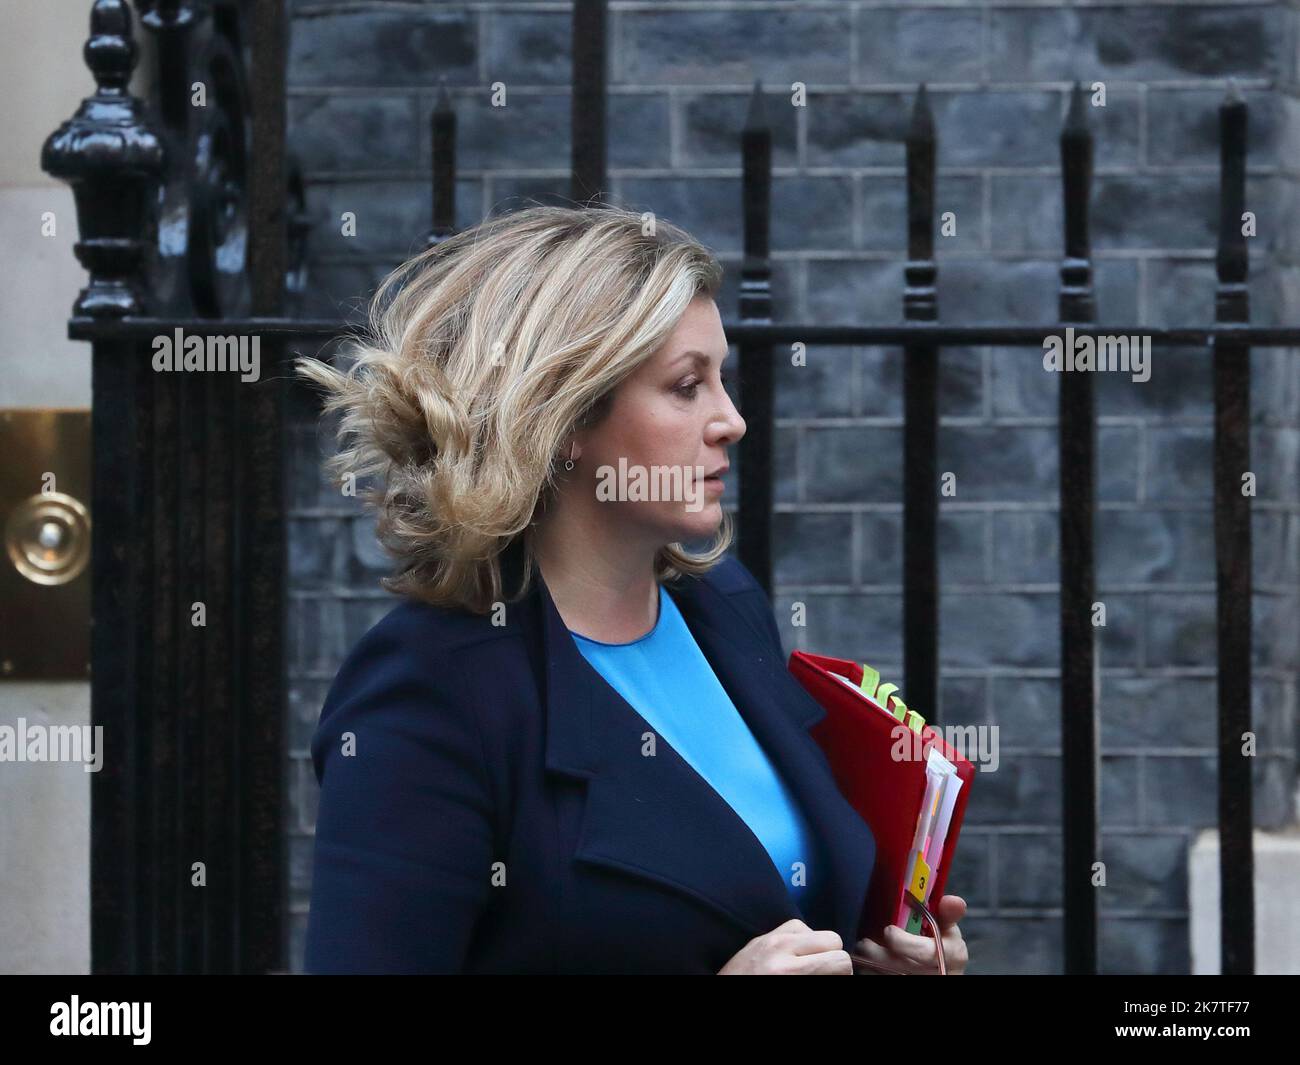 London, UK. 18th Oct 2022. Leader of the House of Commons Penny Mordaunt leaves Downing Street No 10 after the Cabinet Meeting amidst speculation about the Prime Minister's future. Stock Photo